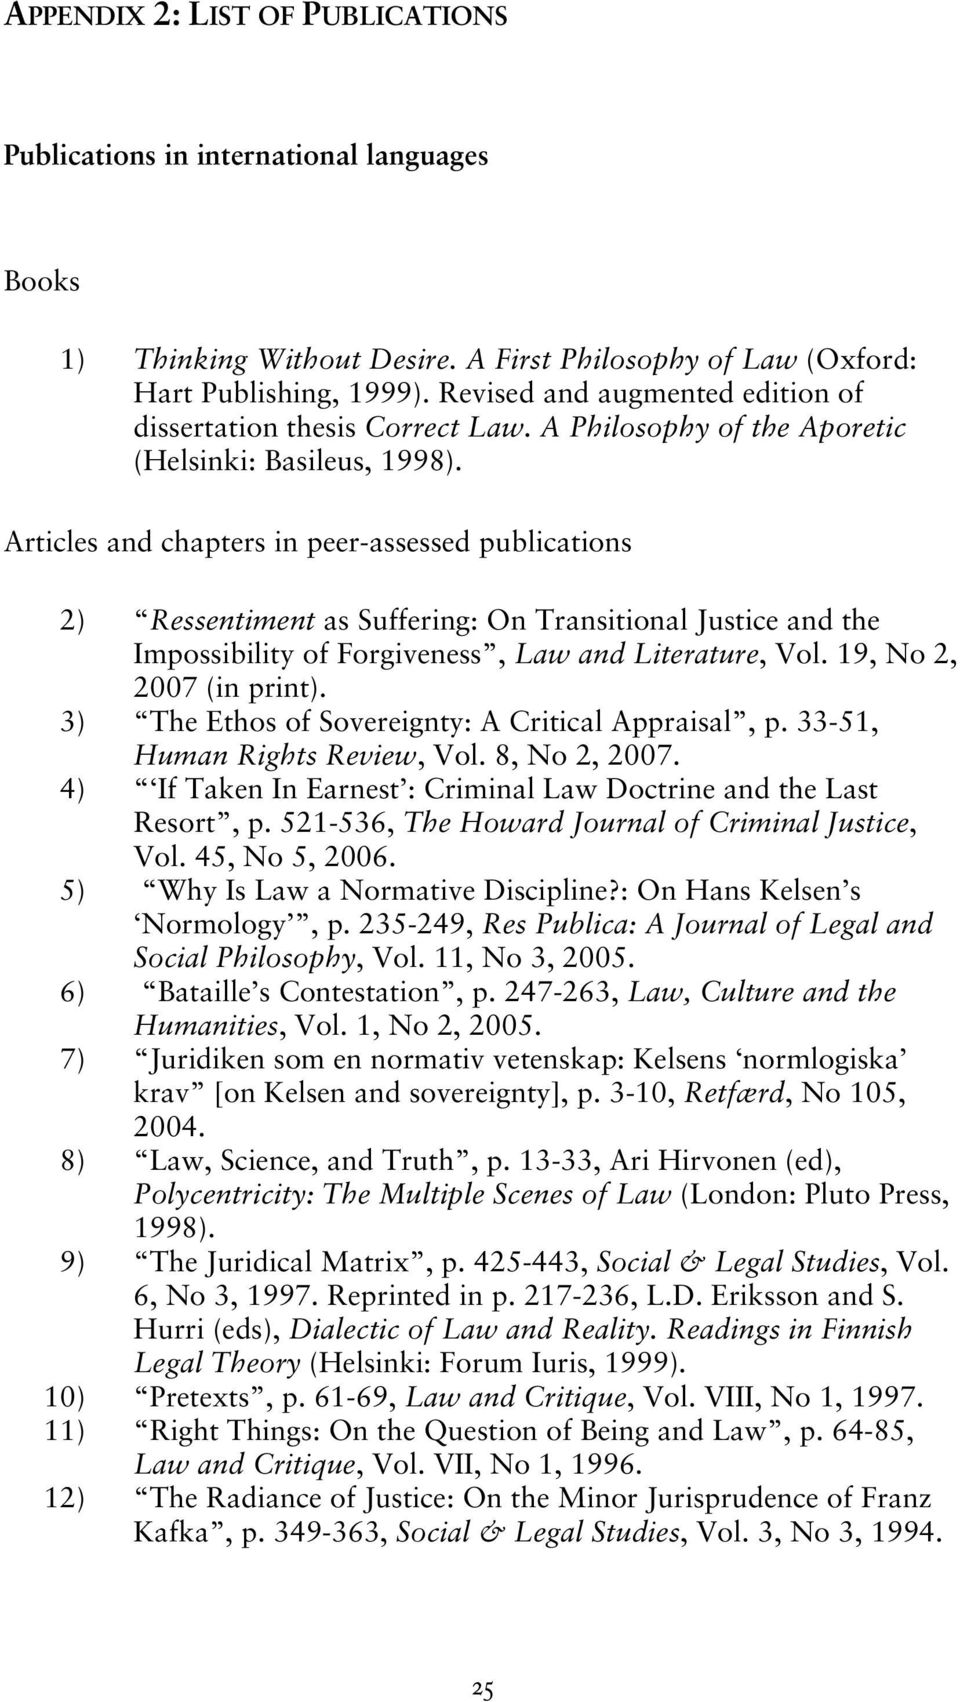 Articles and chapters in peer-assessed publications 2) Ressentiment as Suffering: On Transitional Justice and the Impossibility of Forgiveness, Law and Literature, Vol. 19, No 2, 2007 (in print).